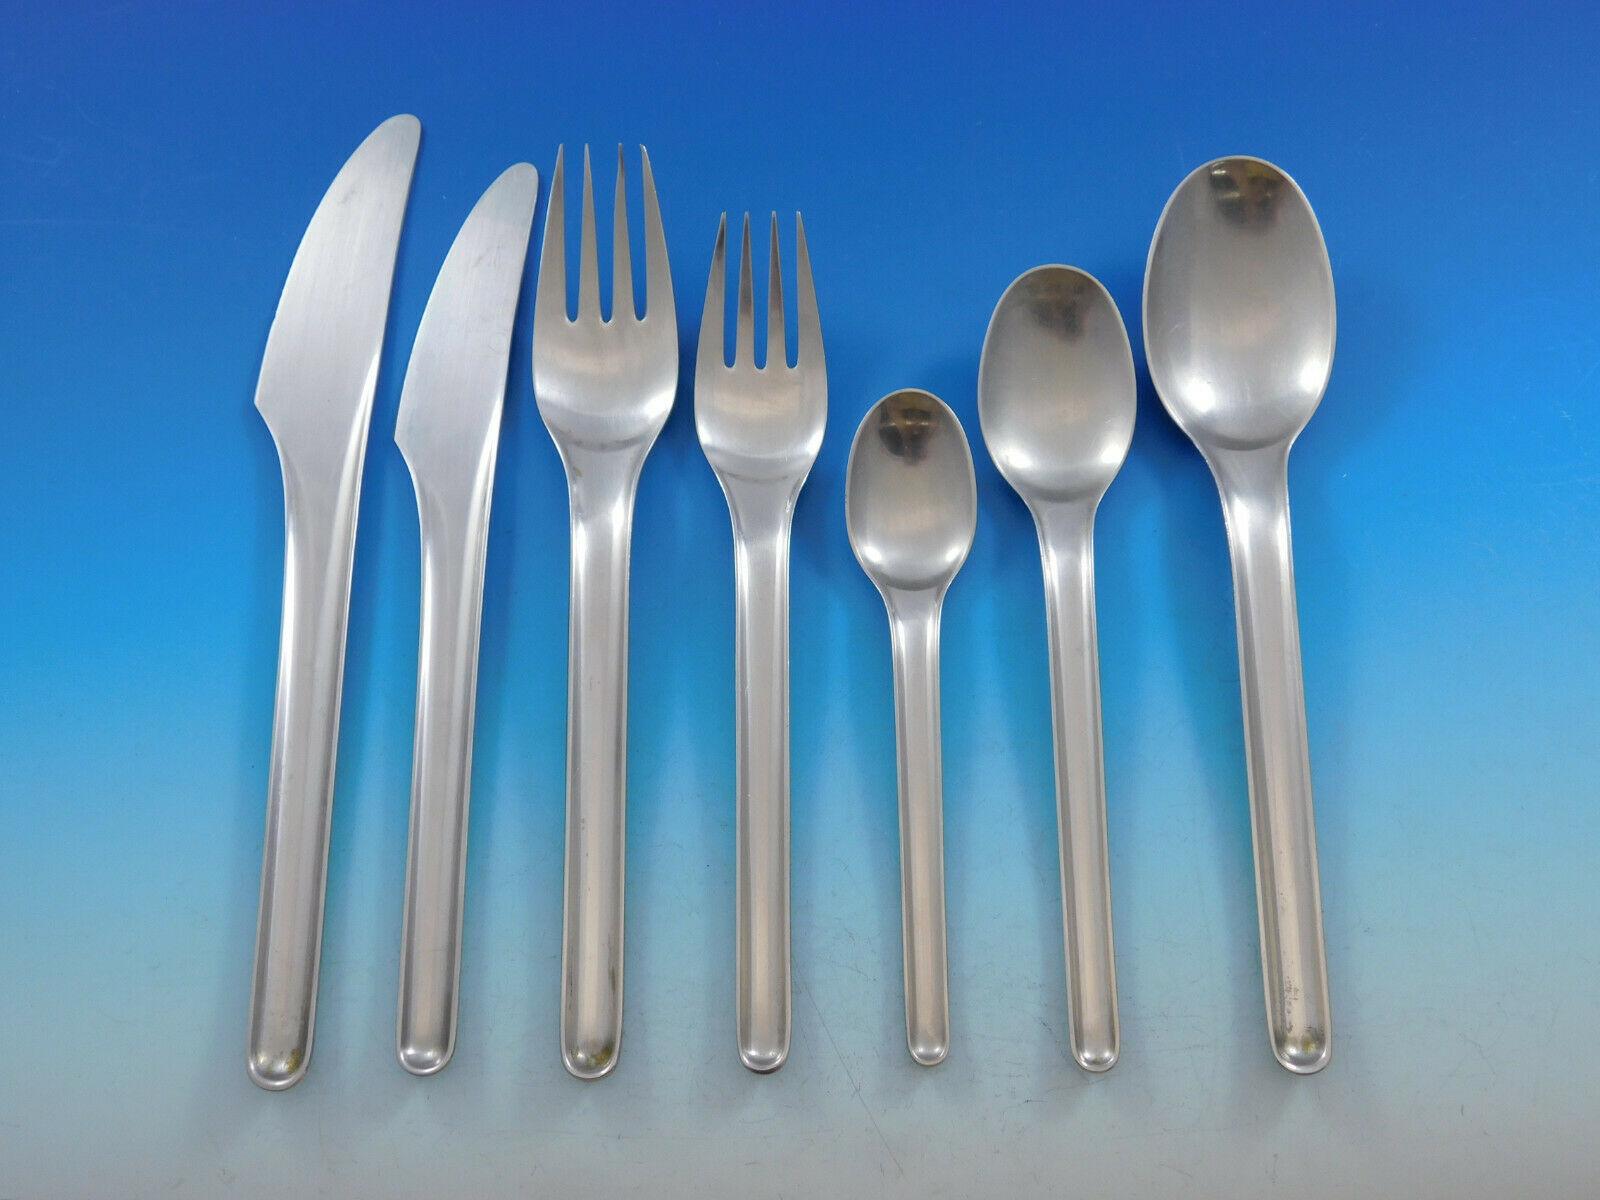 Frigast (Denmark) estate stainless steel modern design flatware set, 42 pieces. This set features elongated, unadorned handles and includes:

6 dinner knives, 8 1/4